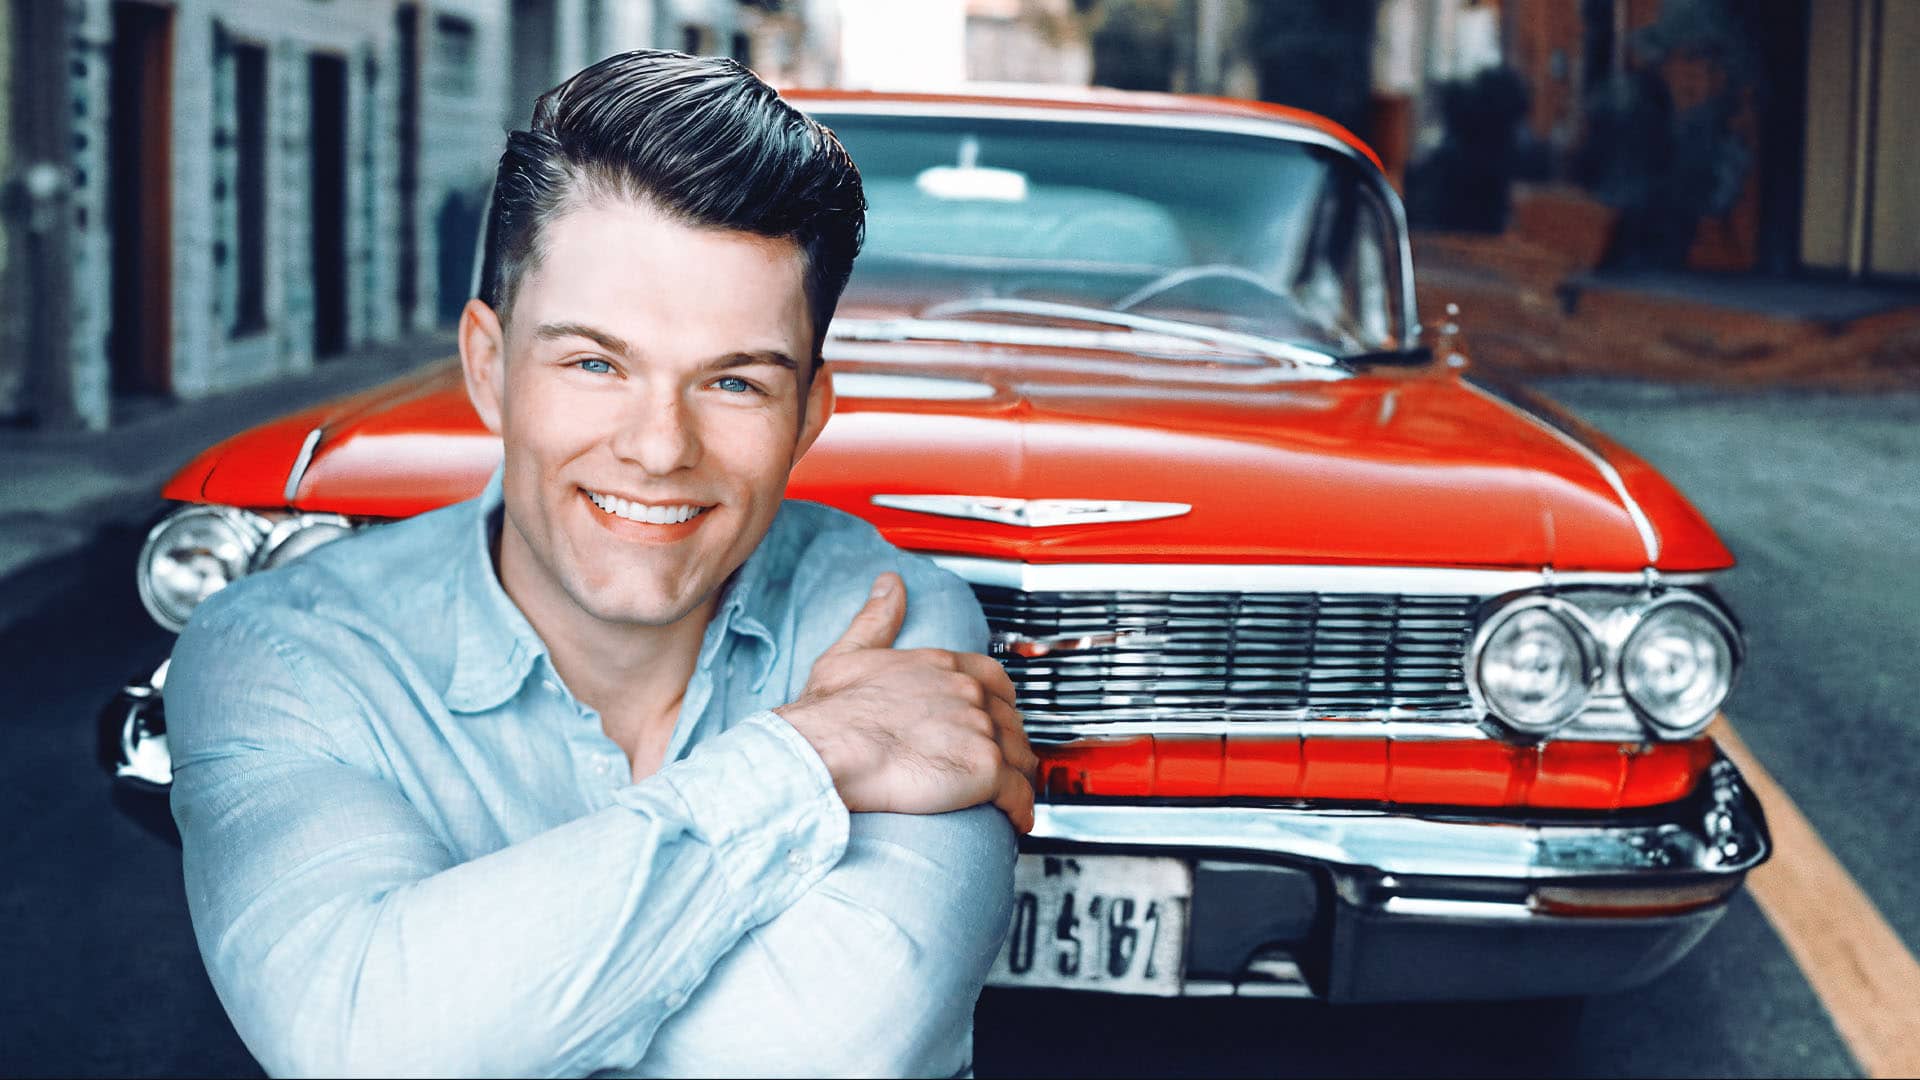 Nick Pritchard leaning on a classic red car, representing his single